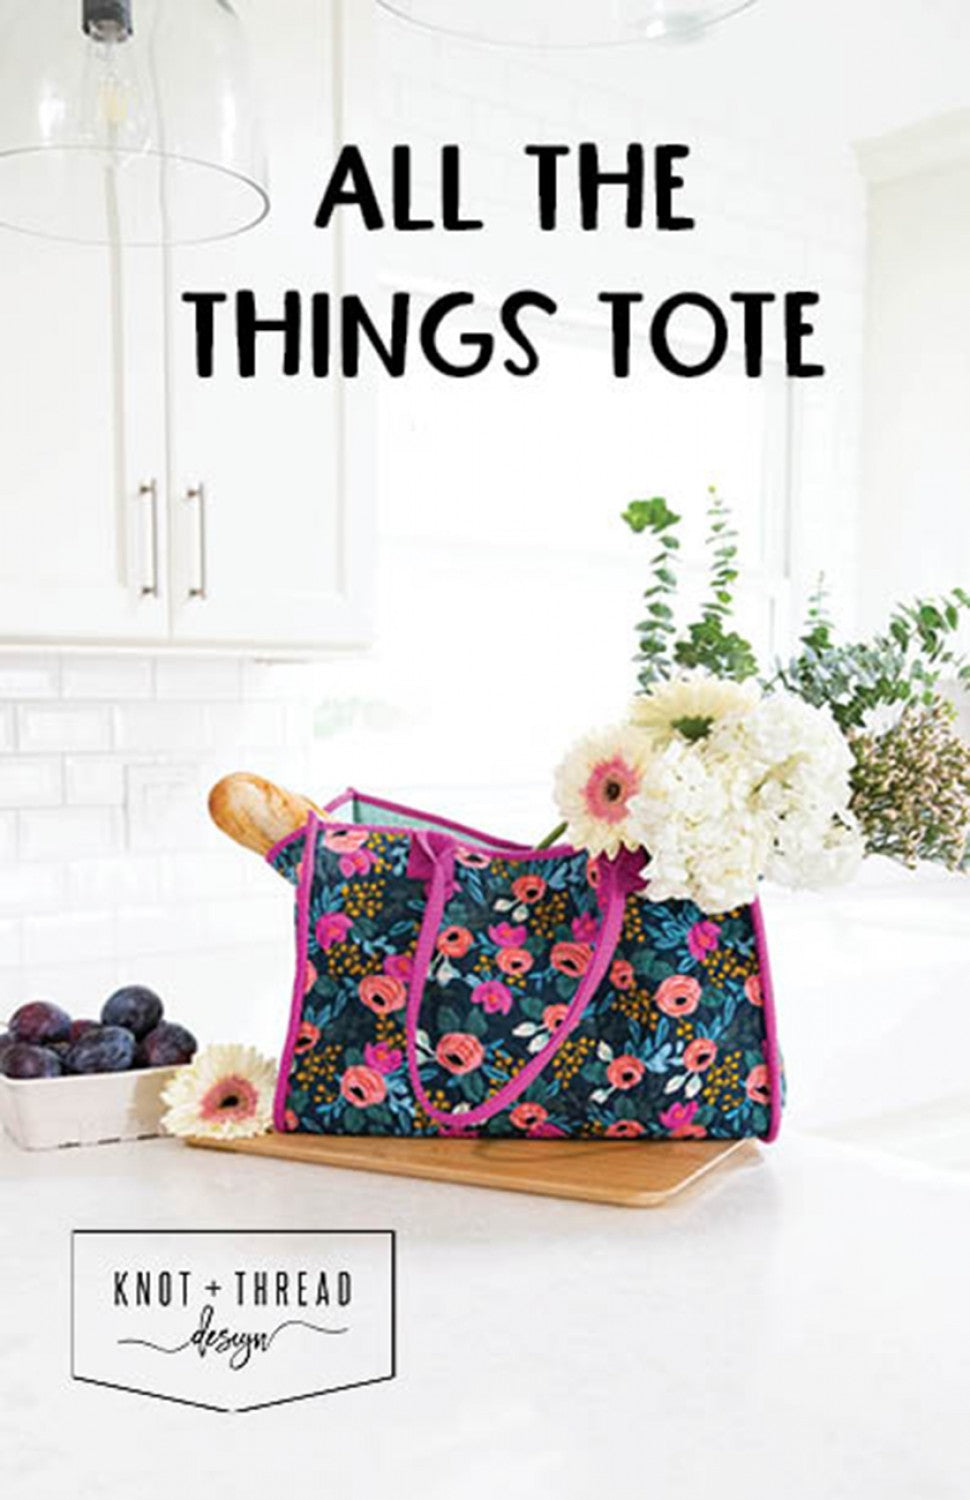 All the Things Tote